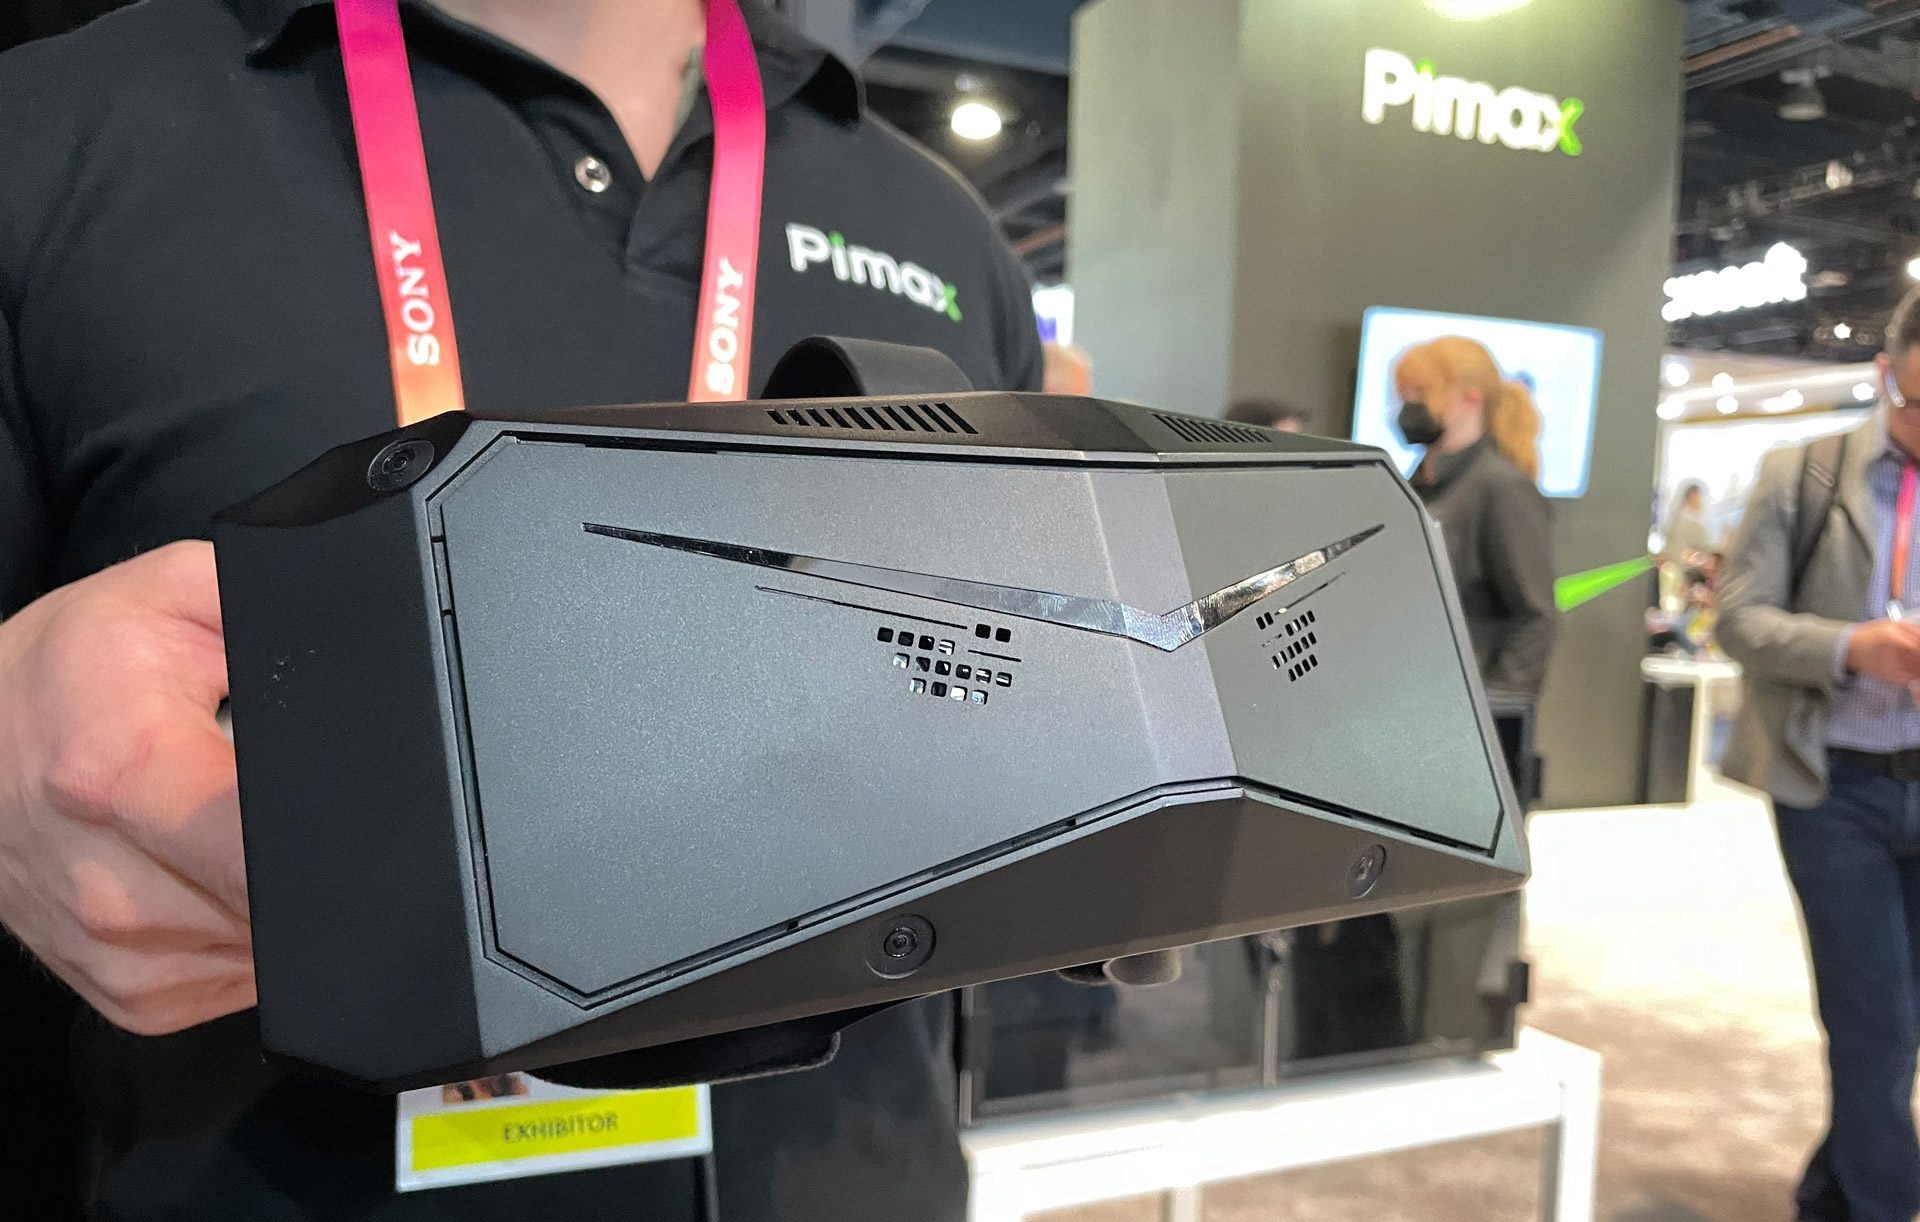 Pimax Crystal's Impressive Clarity Suffers From a (potentially